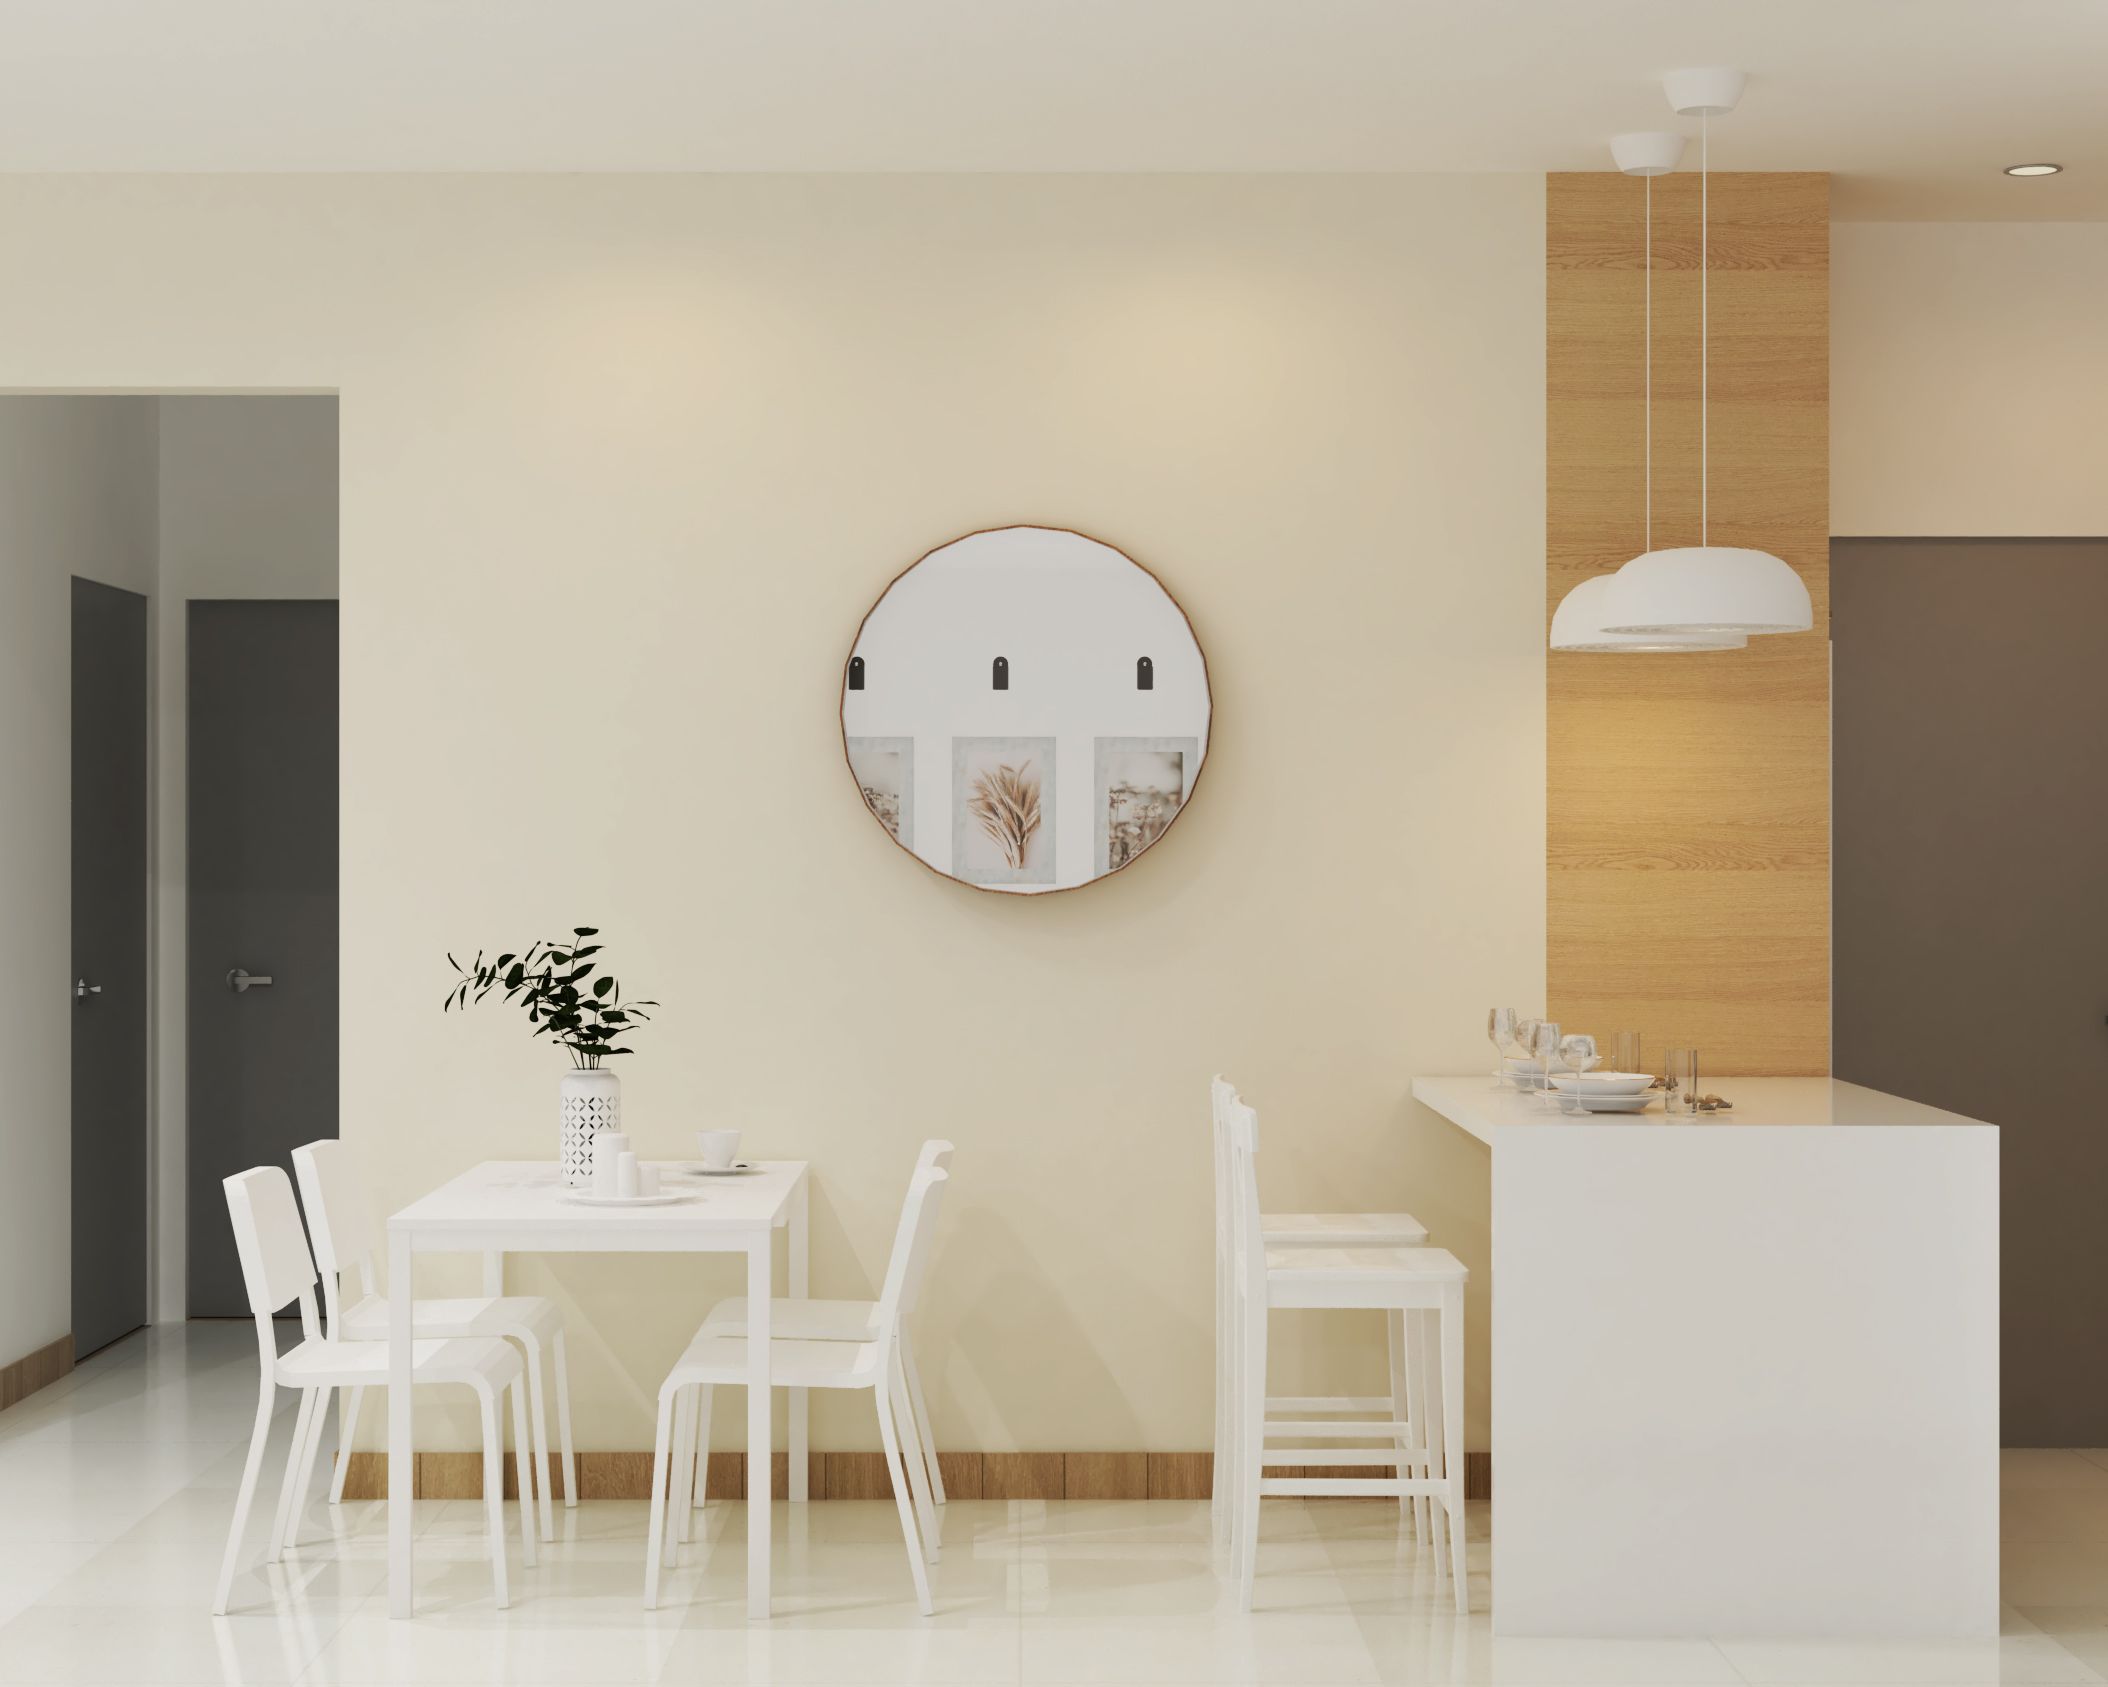 Contemporary 4-Seater Dining Room Design With White Chairs